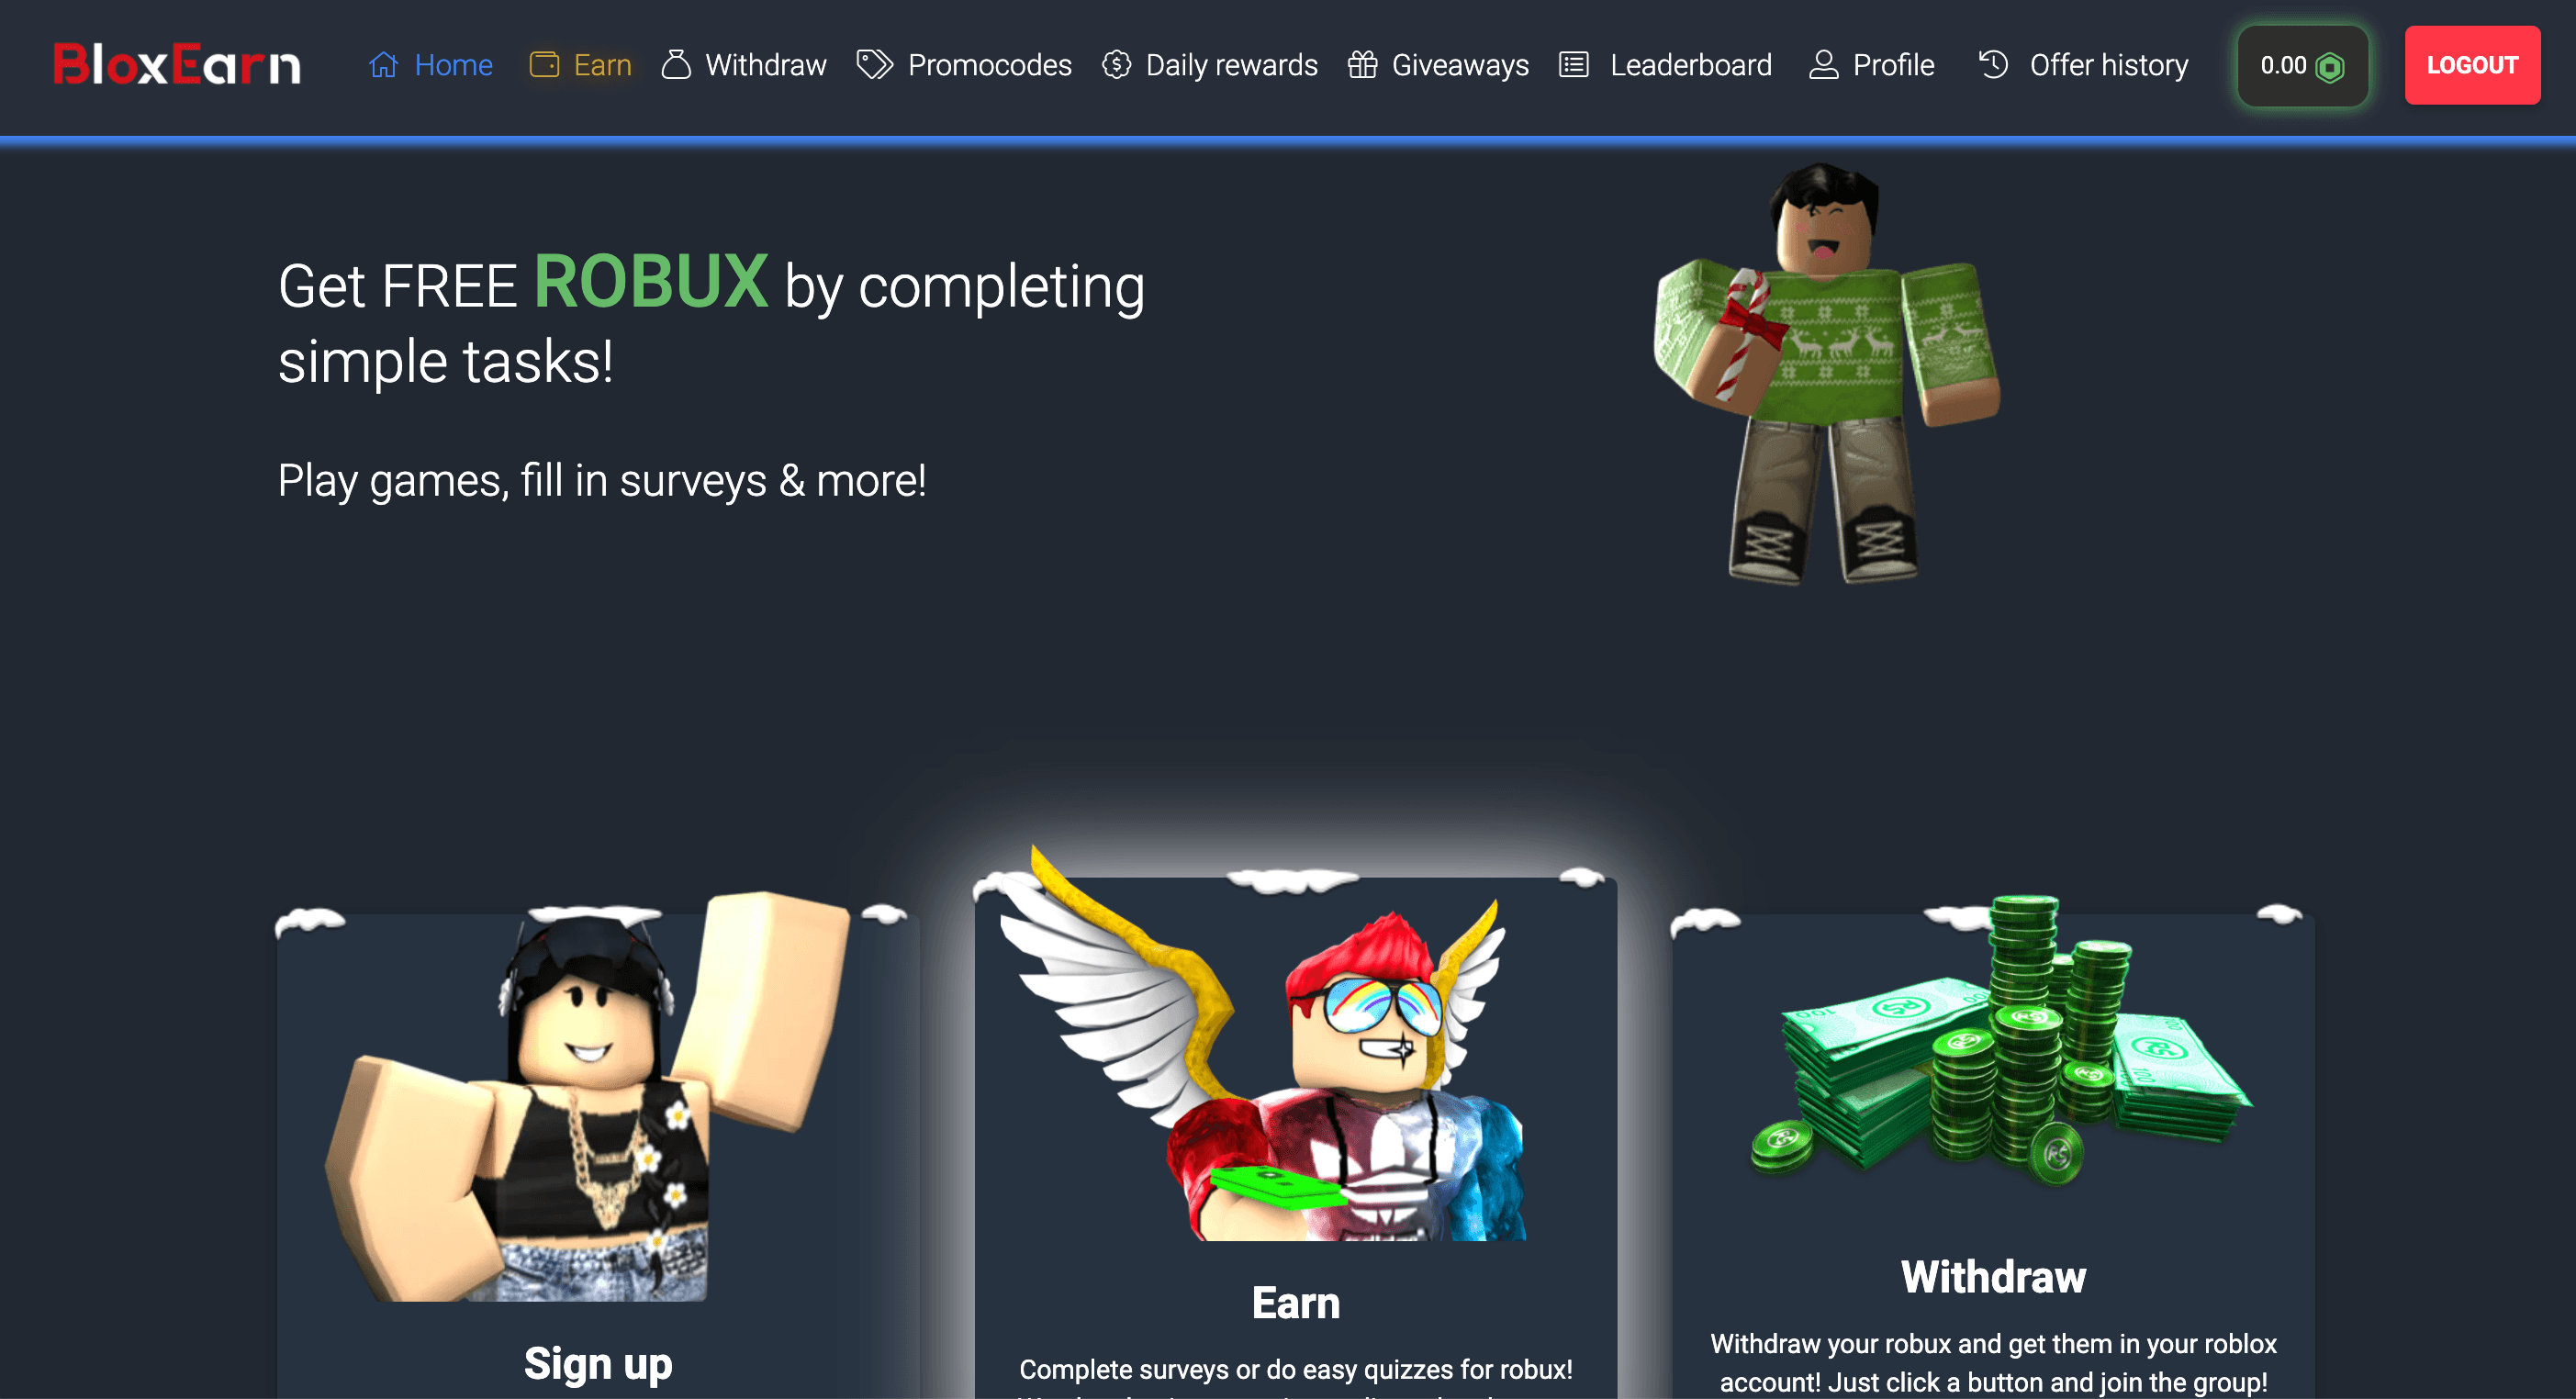 Roblox Promo Codes July 2021 For 1 000 Free Robux Items - games that cost robux in roblox